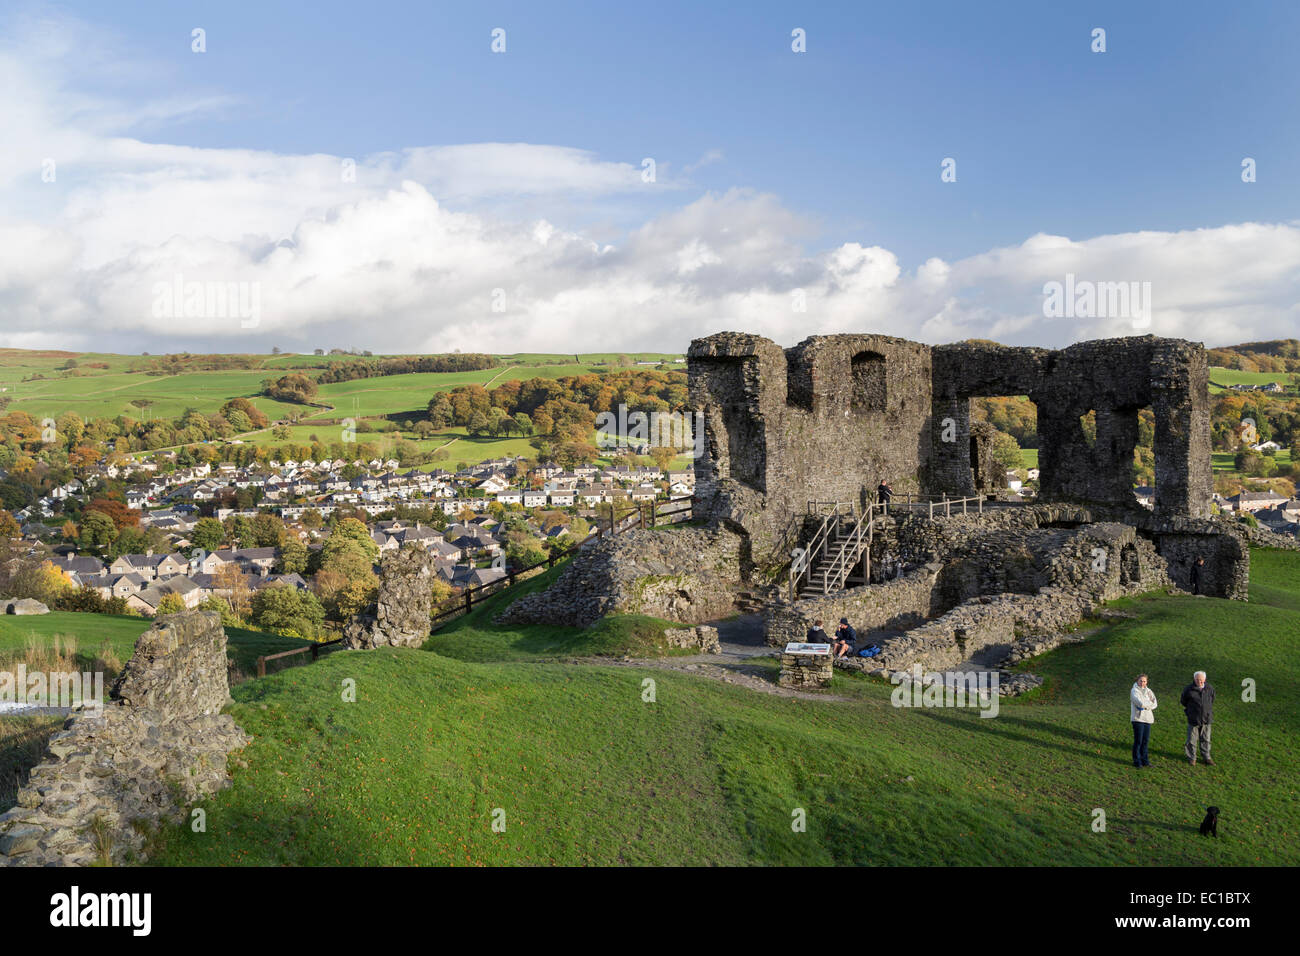 UK, Kendal, the ruins of Kendal Castle. Stock Photo